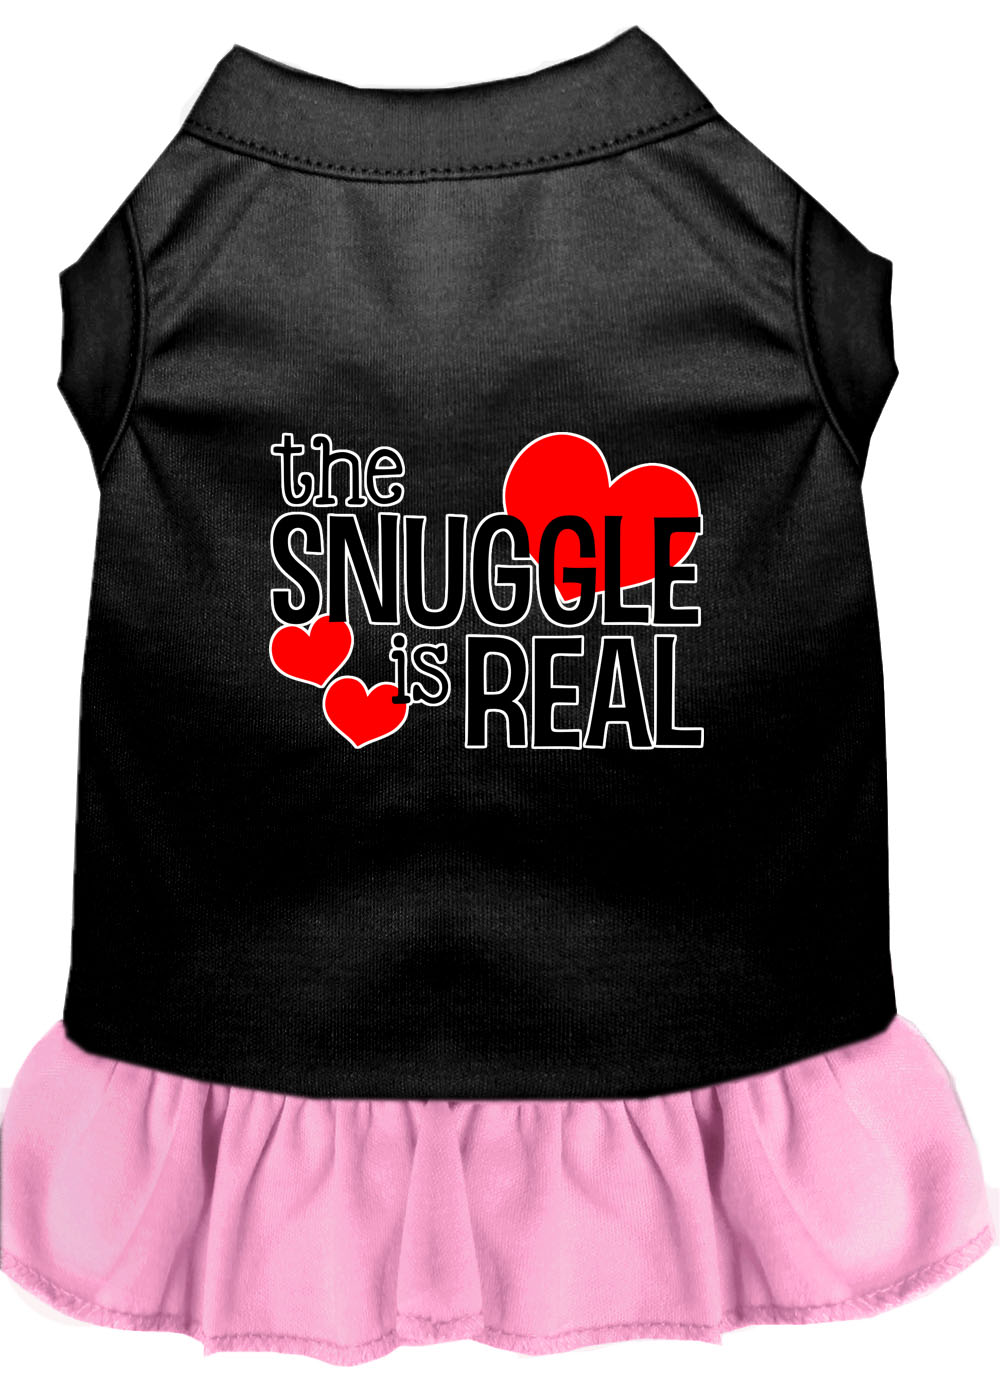 The Snuggle is Real Screen Print Dog Dress Black with Light Pink XL